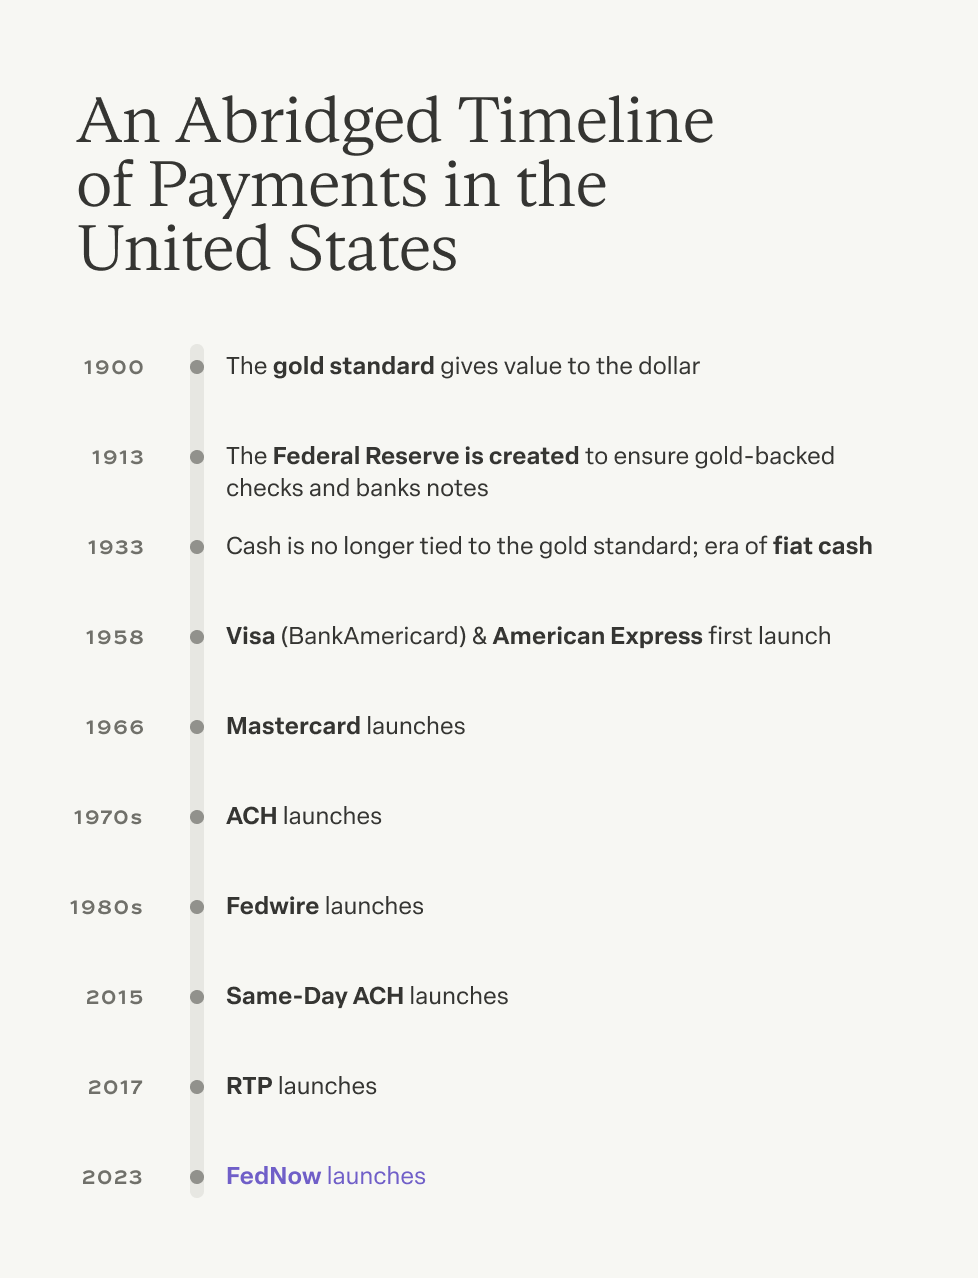 An abridged timeline of payments in the US